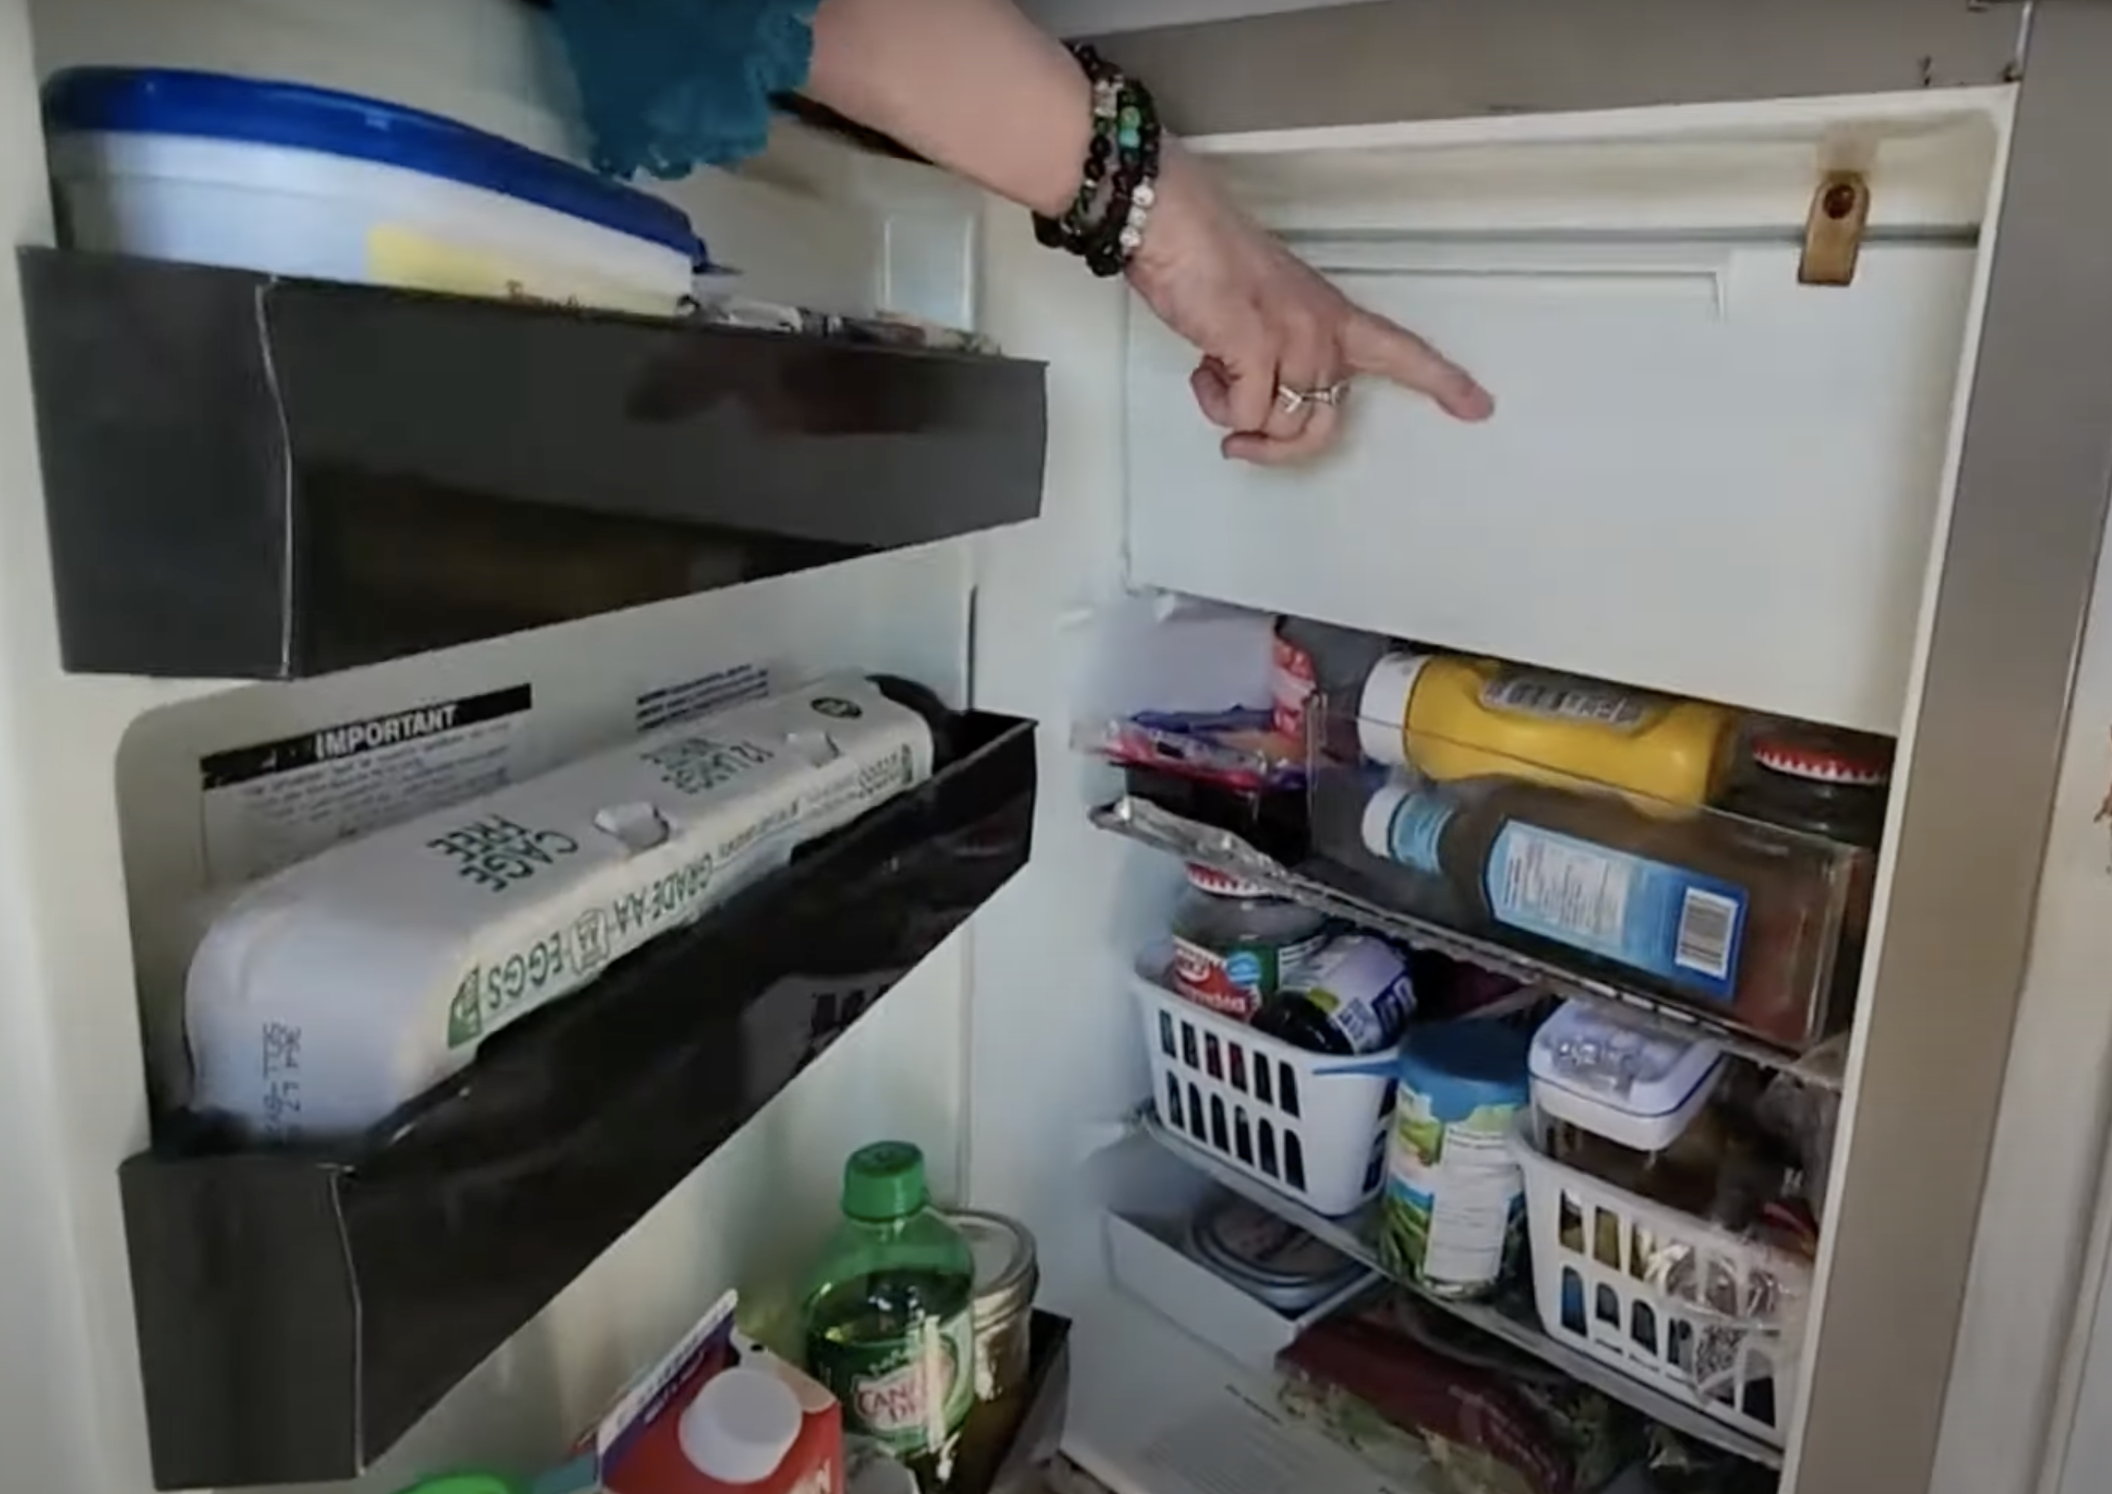 The kitchen has a fully functioning fridge with a small freezer